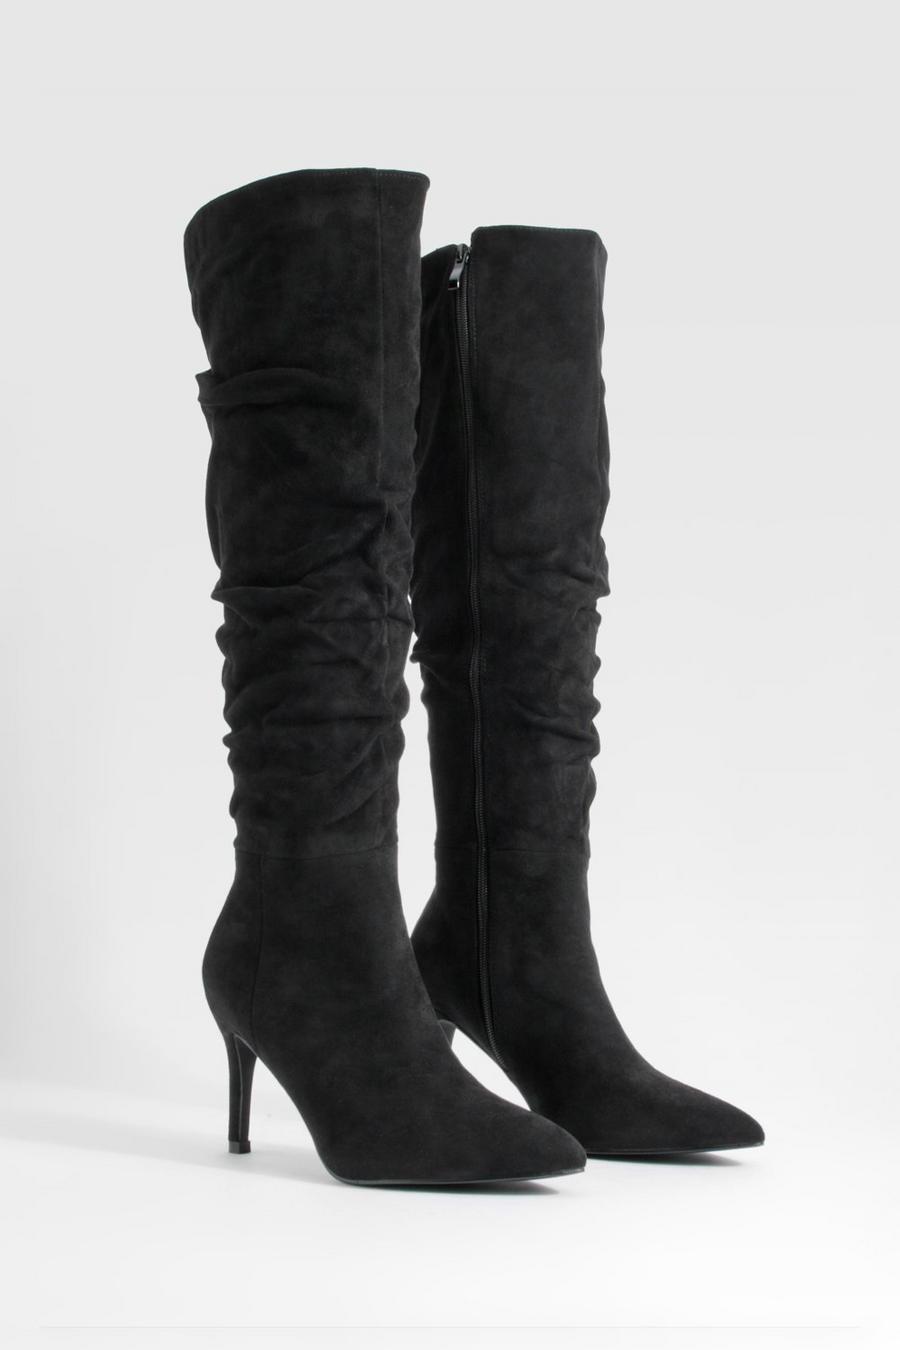 Ruched Stiletto Knee High Boots | Boohoo UK